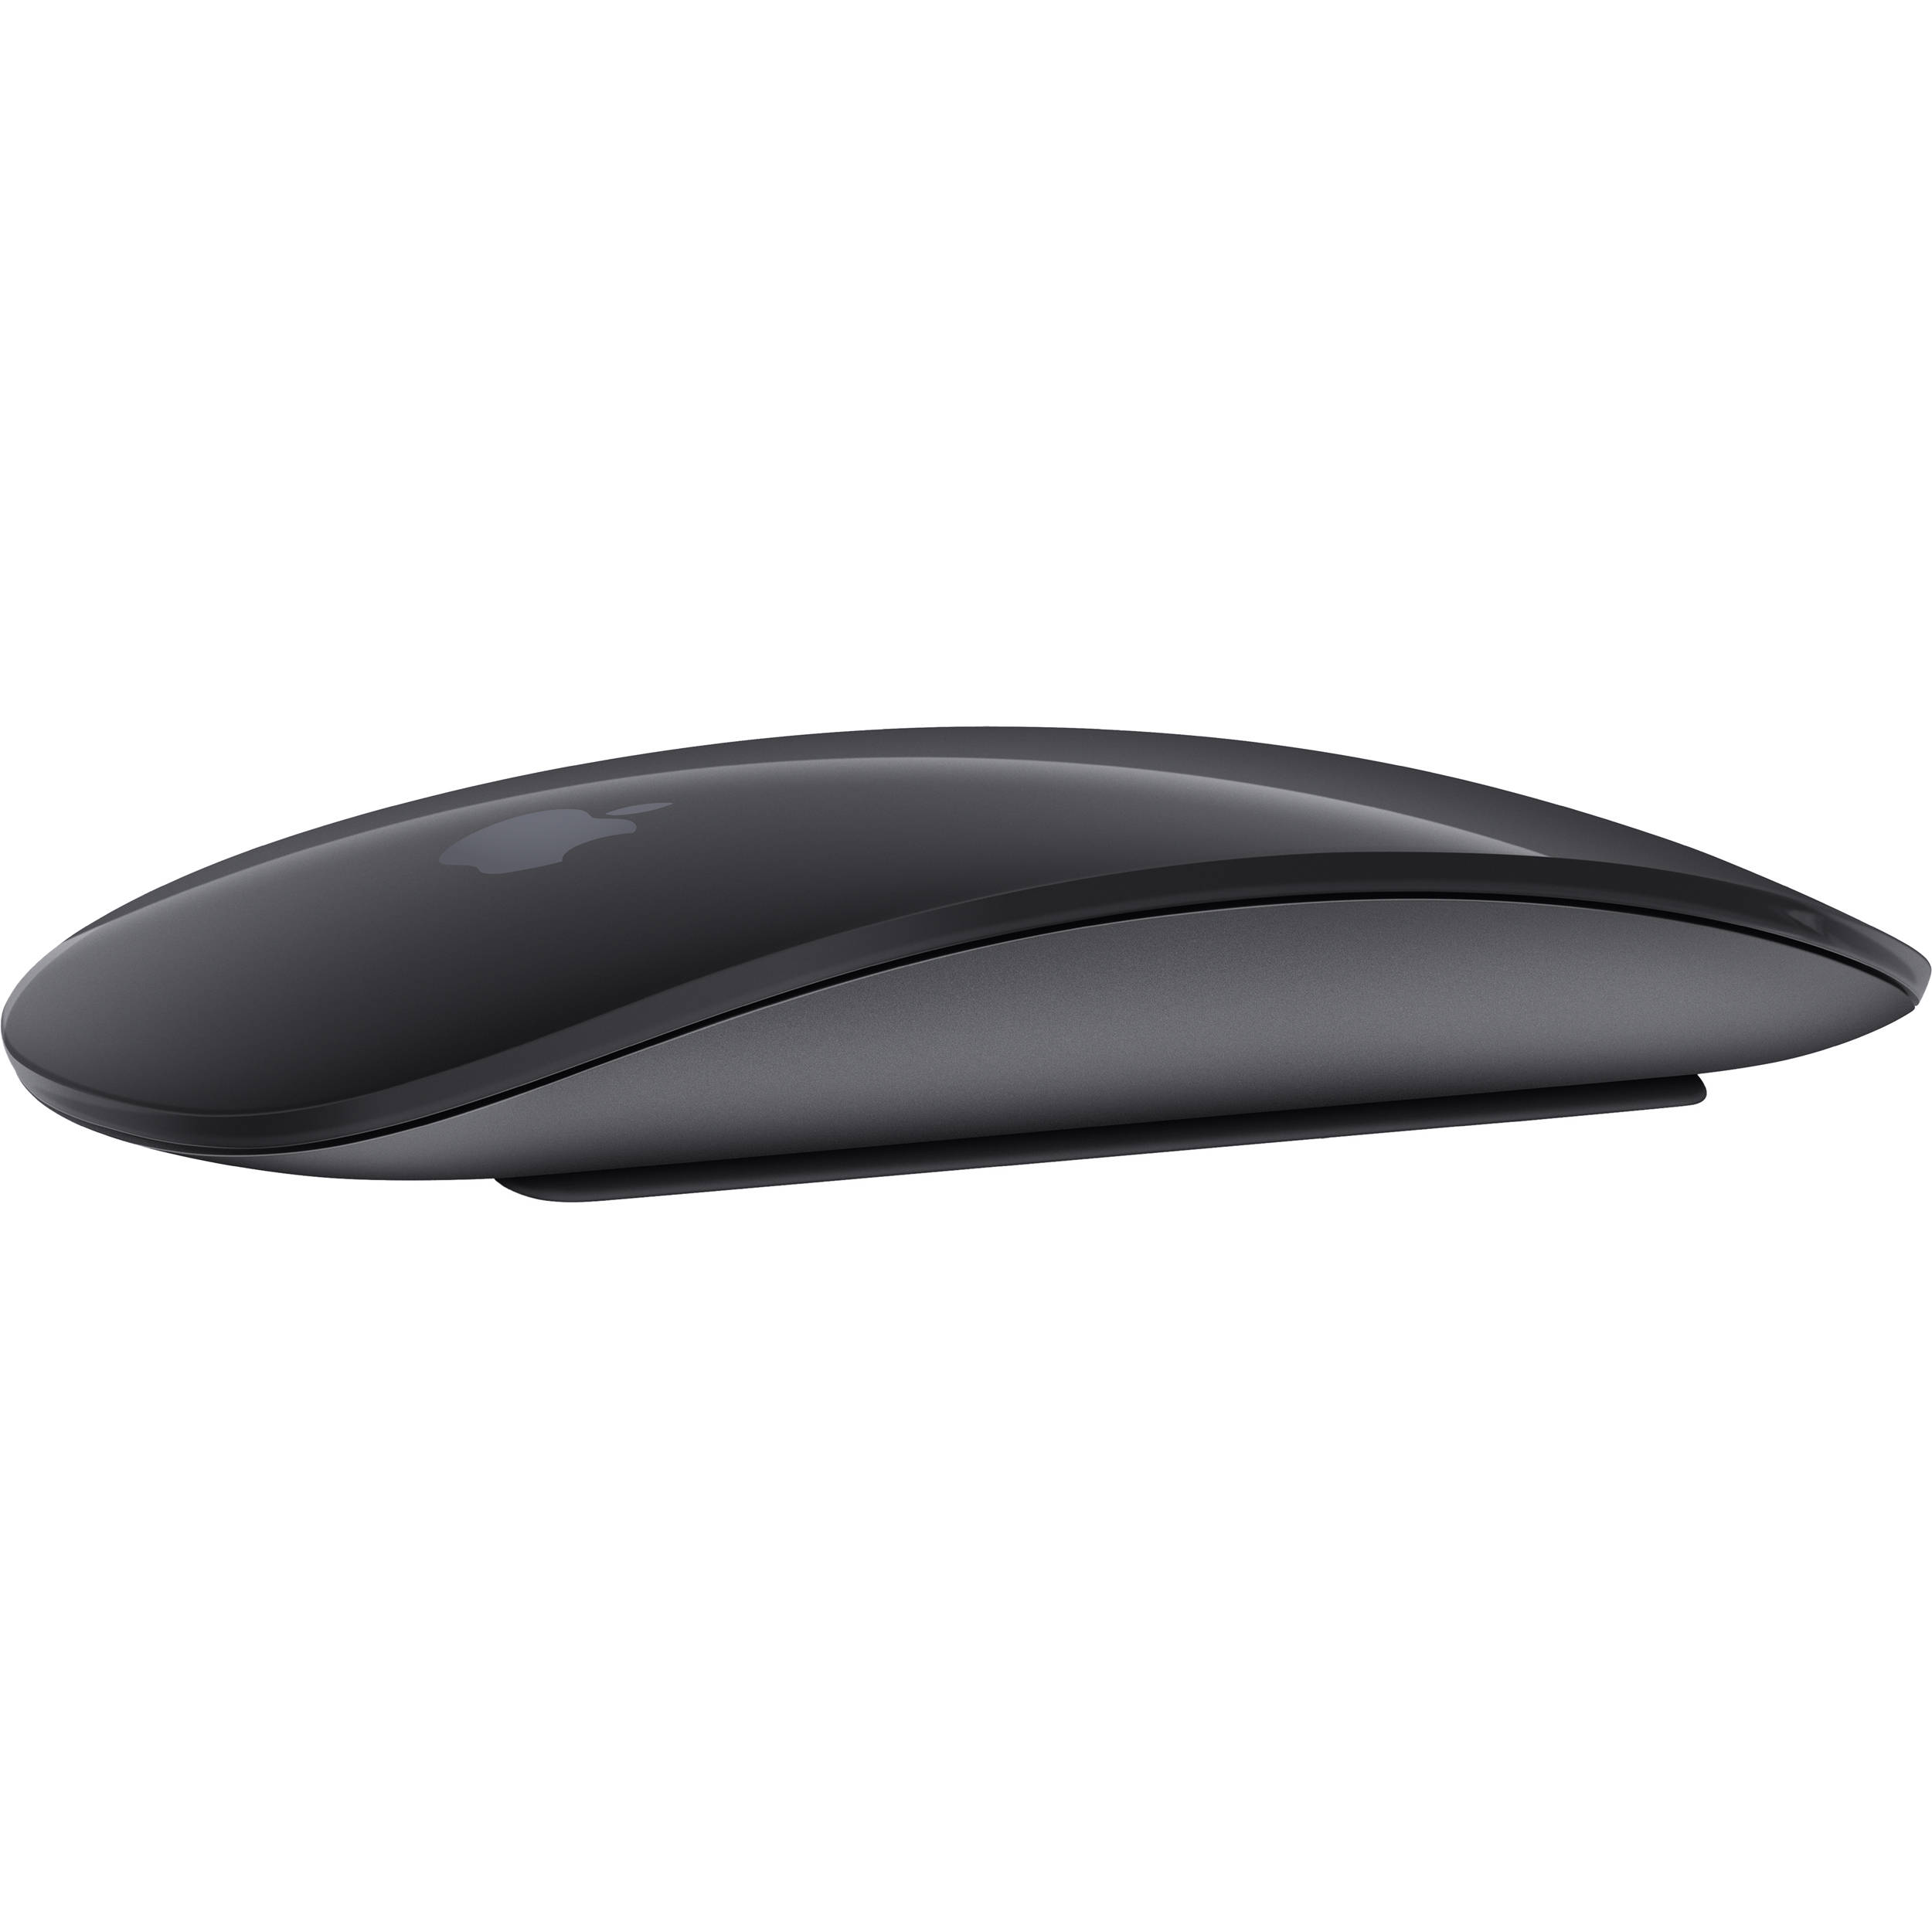 APPLE MAGIC MOUSE 2 SPACE GRAY - Mac Power Store